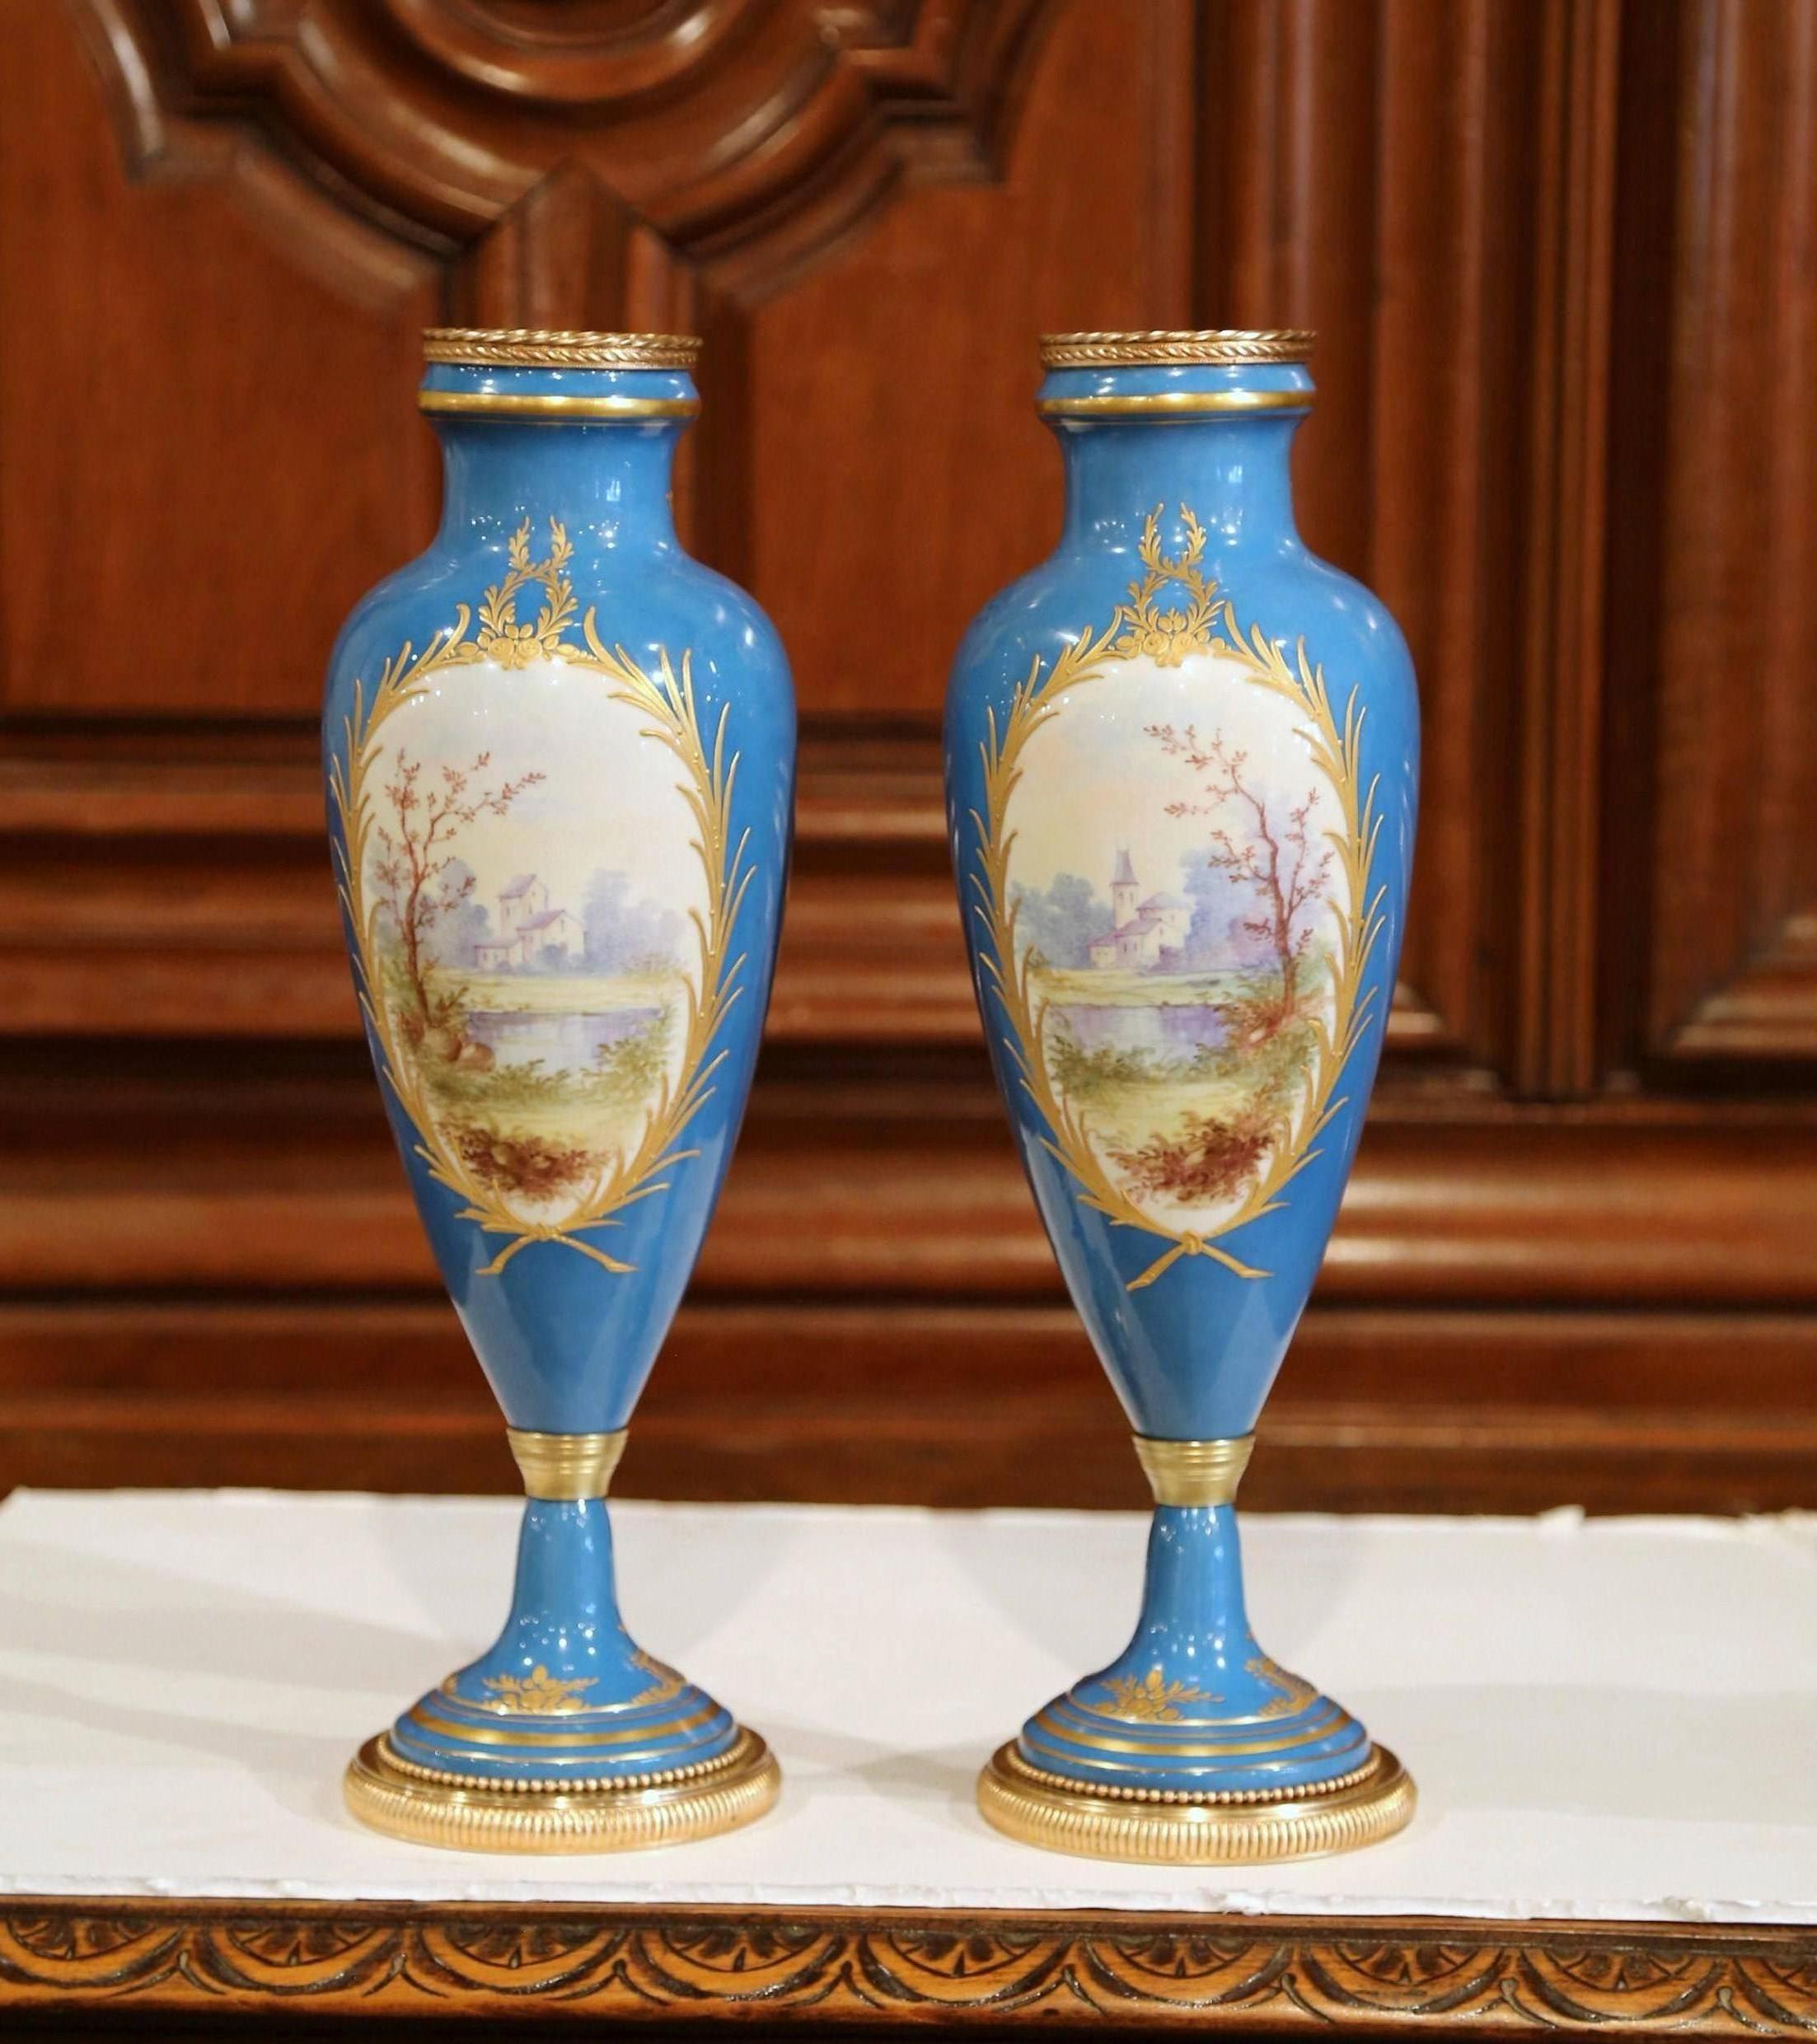 This elegant pair of antique Sevres uncovered vases was created in Paris, circa 1860, each piece is signed 